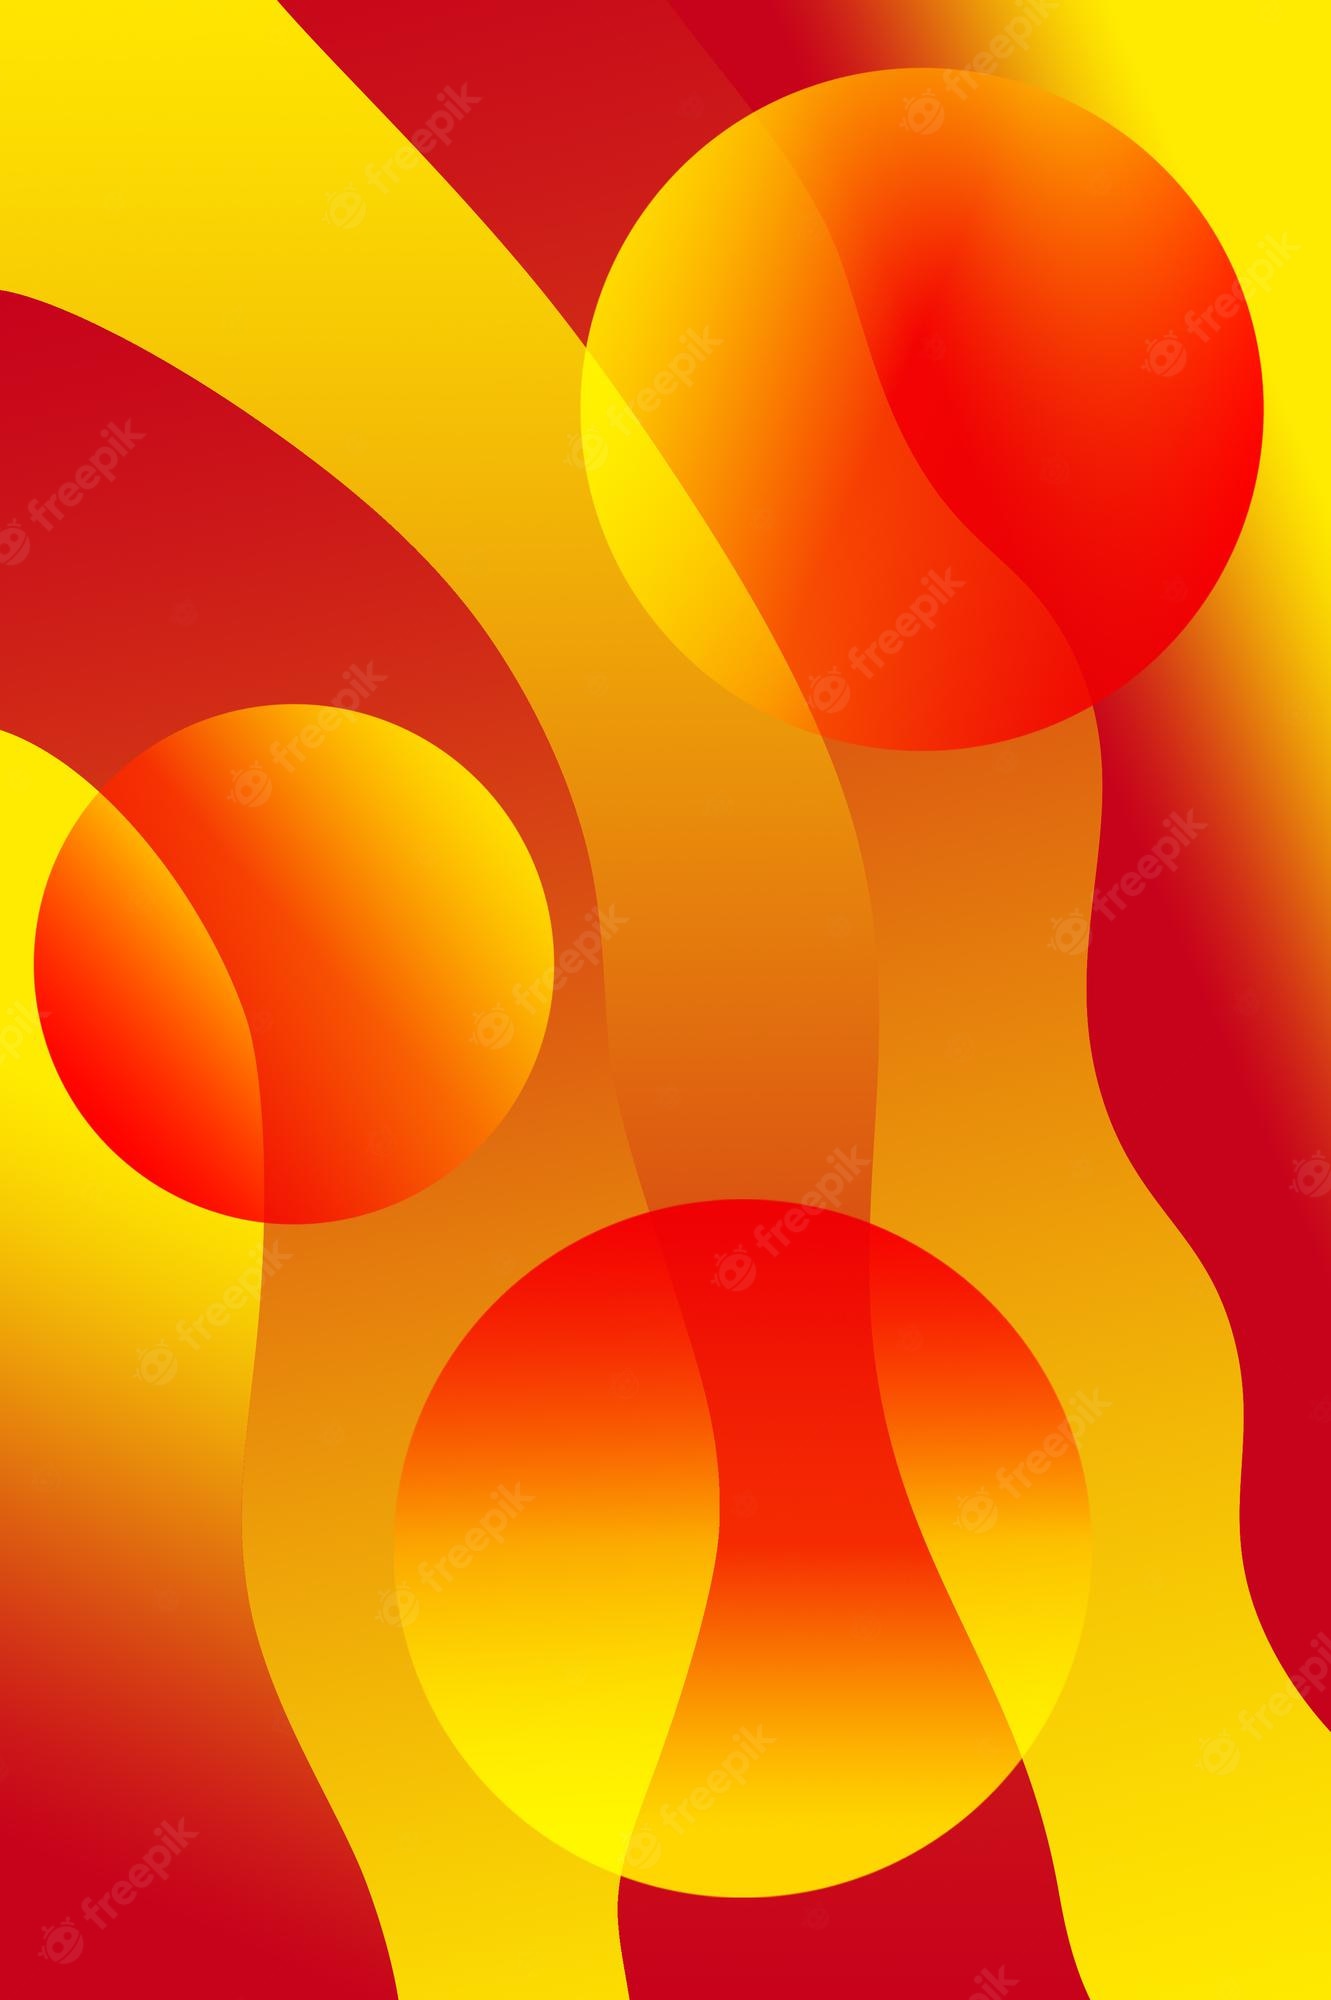 Premium photo abstract beautiful modern background with gradient sphere red and yellow colors gradient graphic arts for posters banners wallpaper design trends zine culture pop art retro style